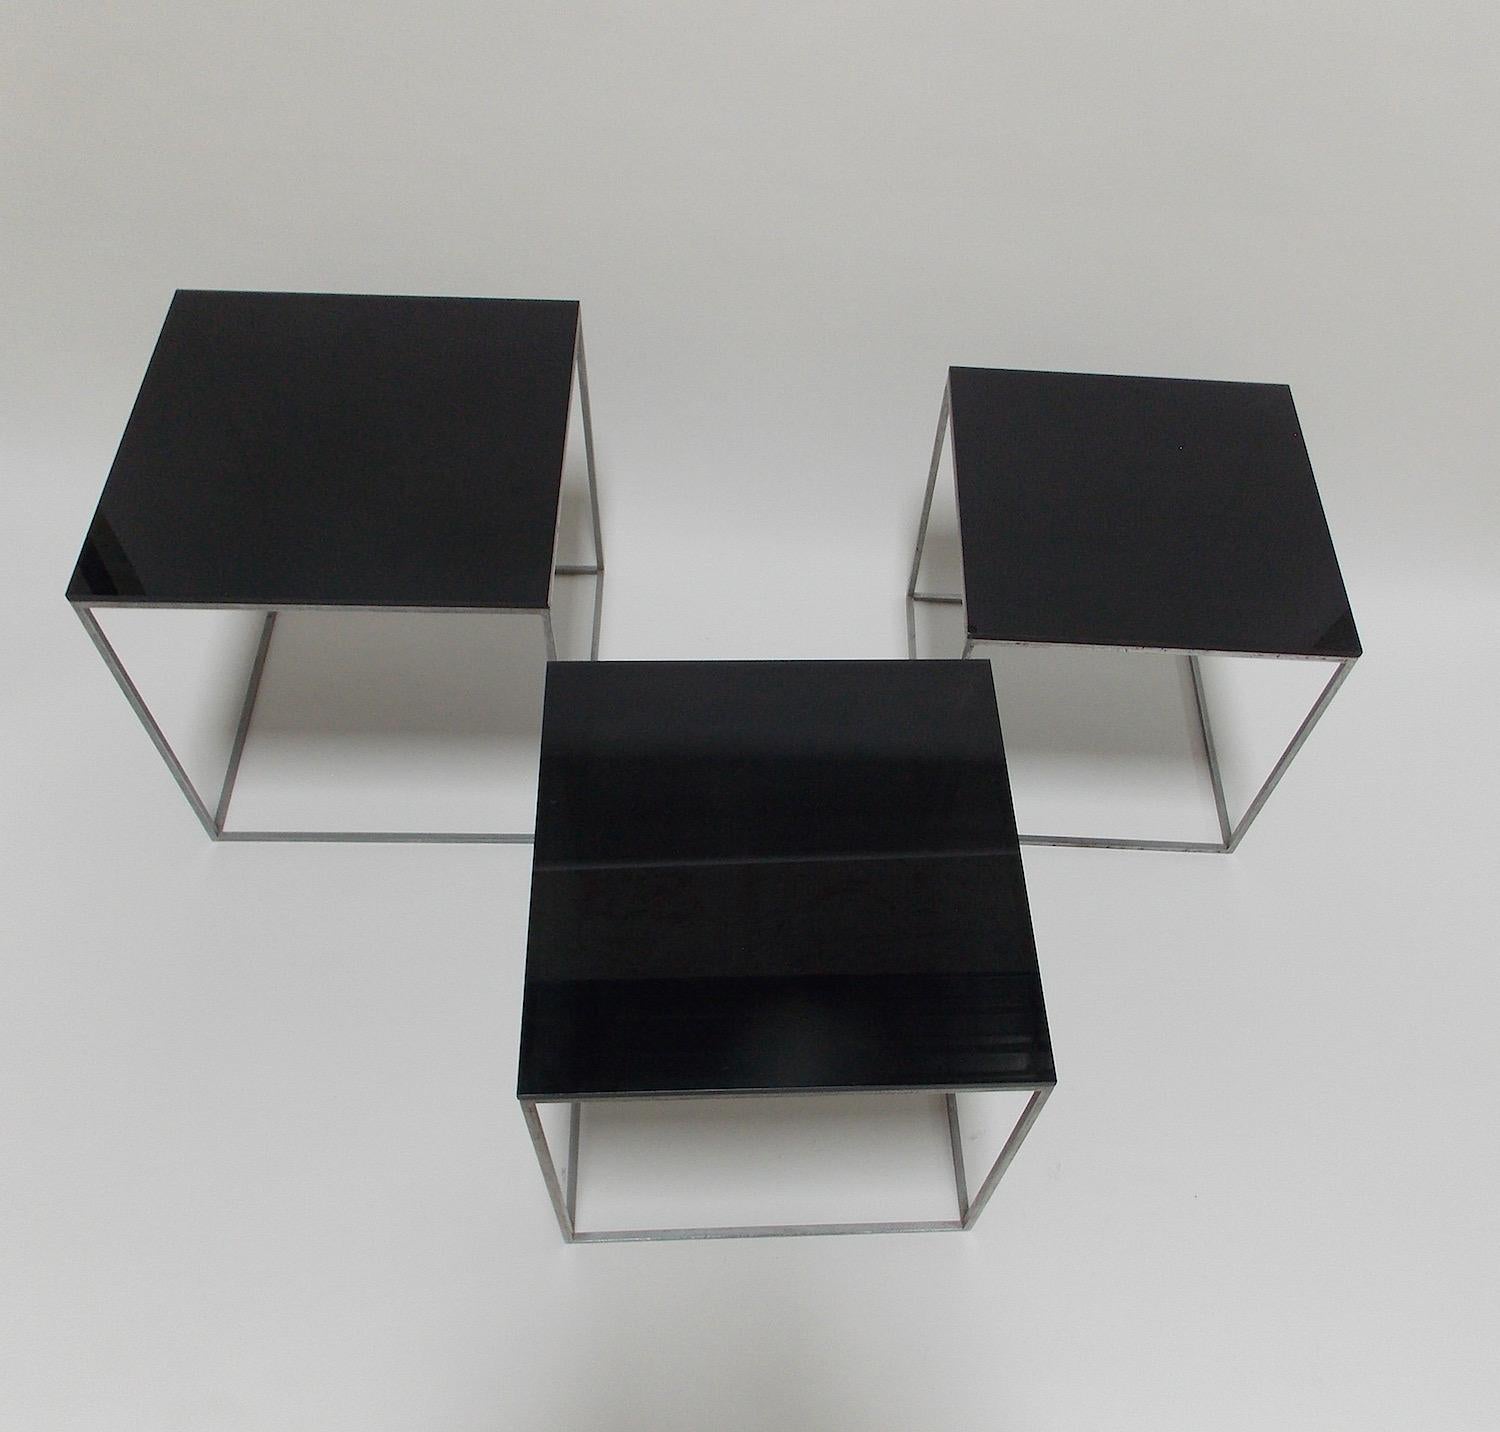 A set of 3 PK71 tables.
Original matte steel surface with inset acrylic tops.